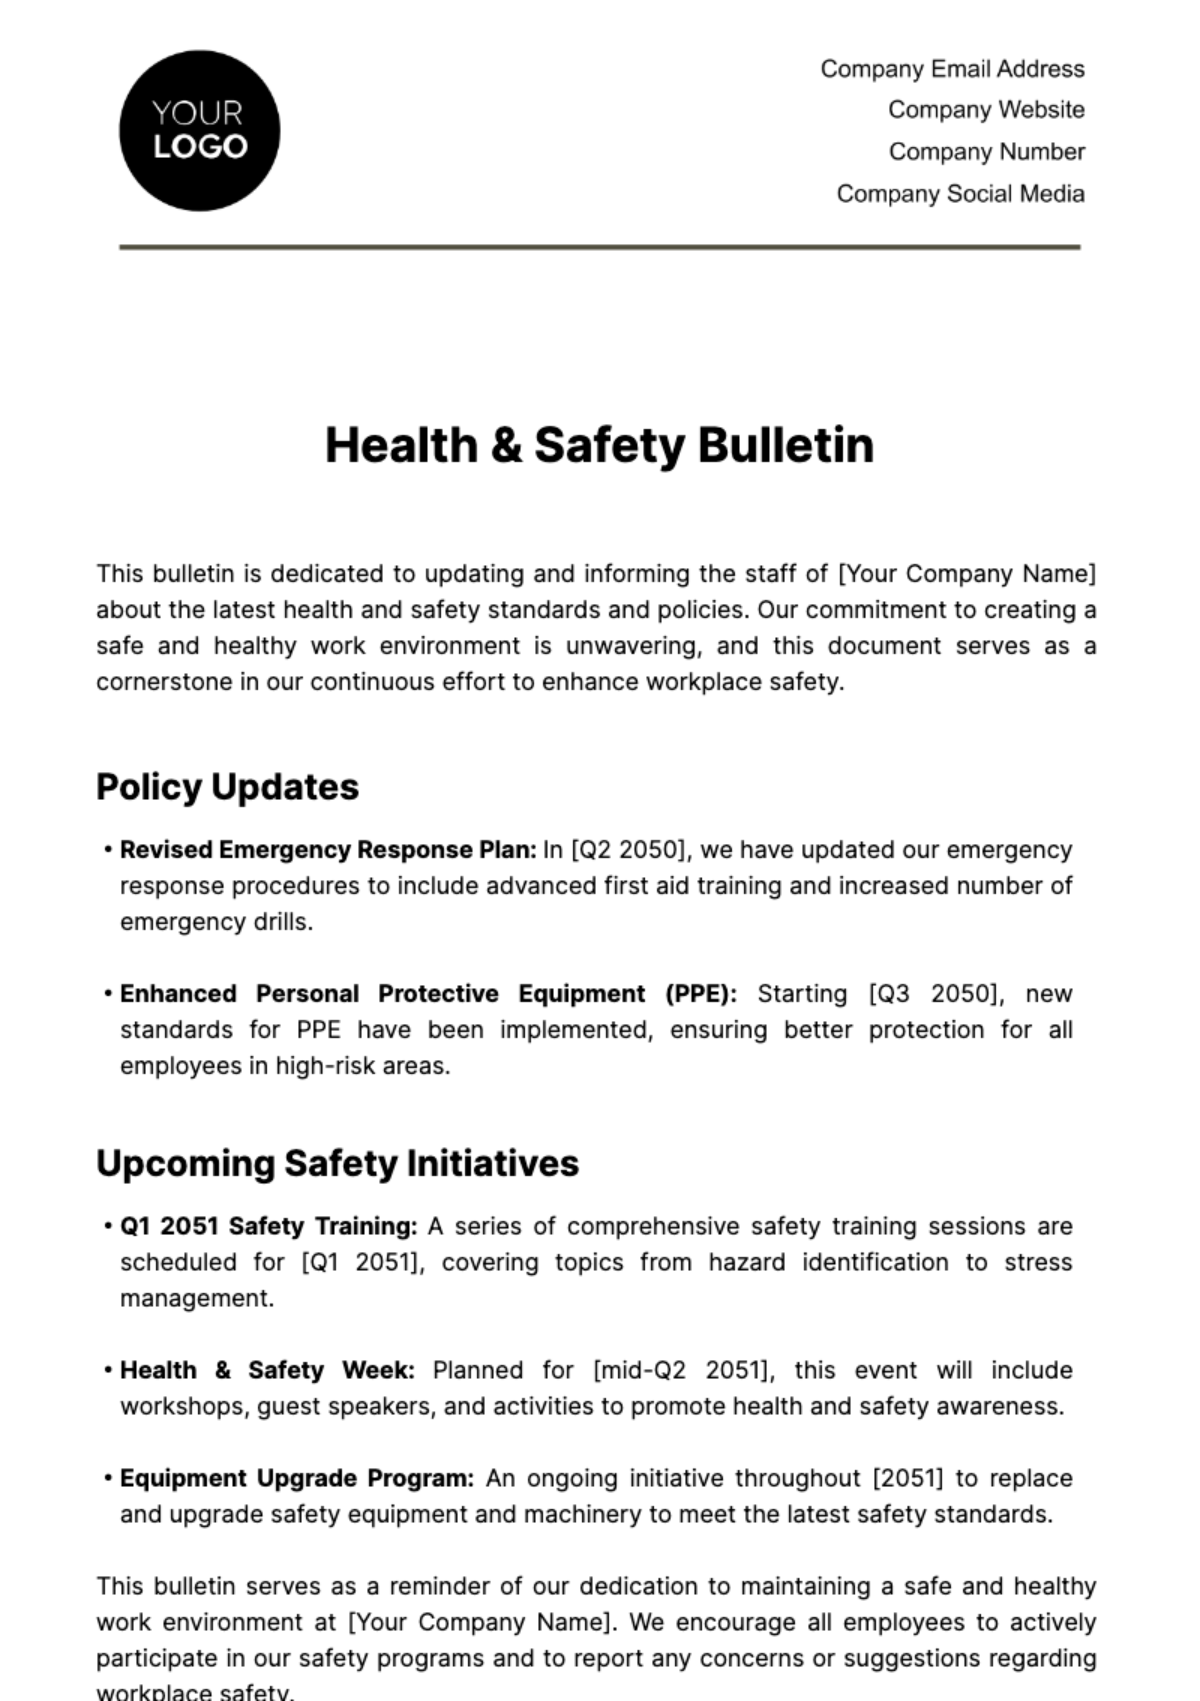 Free Health & Safety Bulletin Template